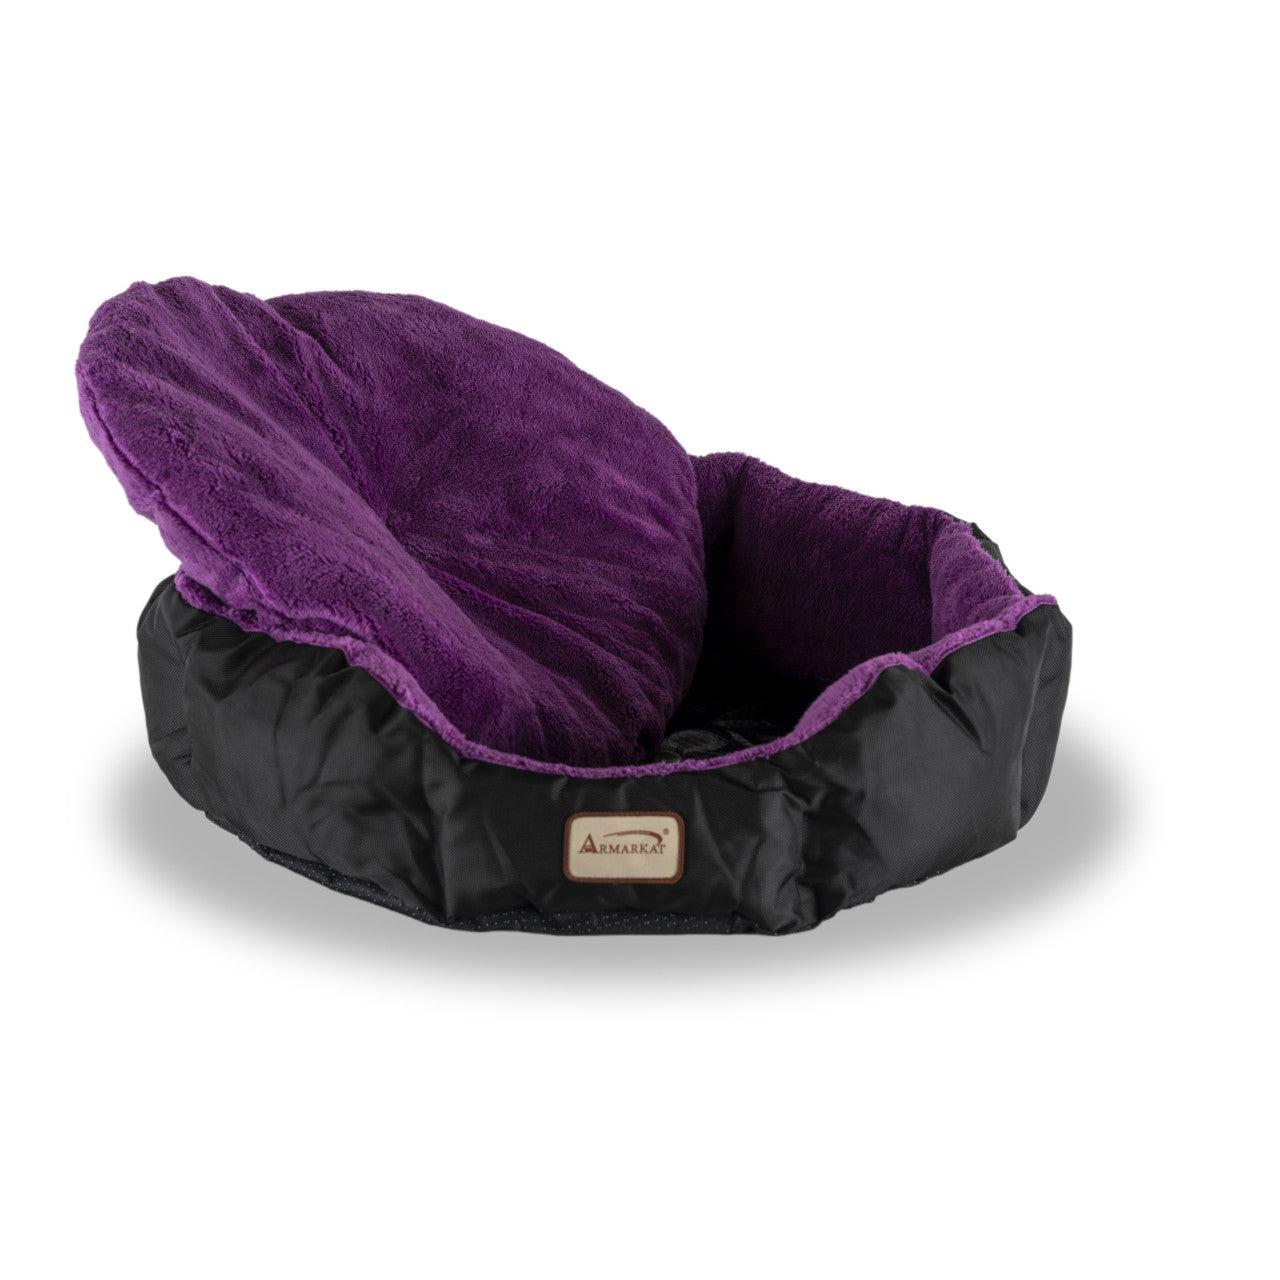 Large, Soft Cat Bed in Purple & Black